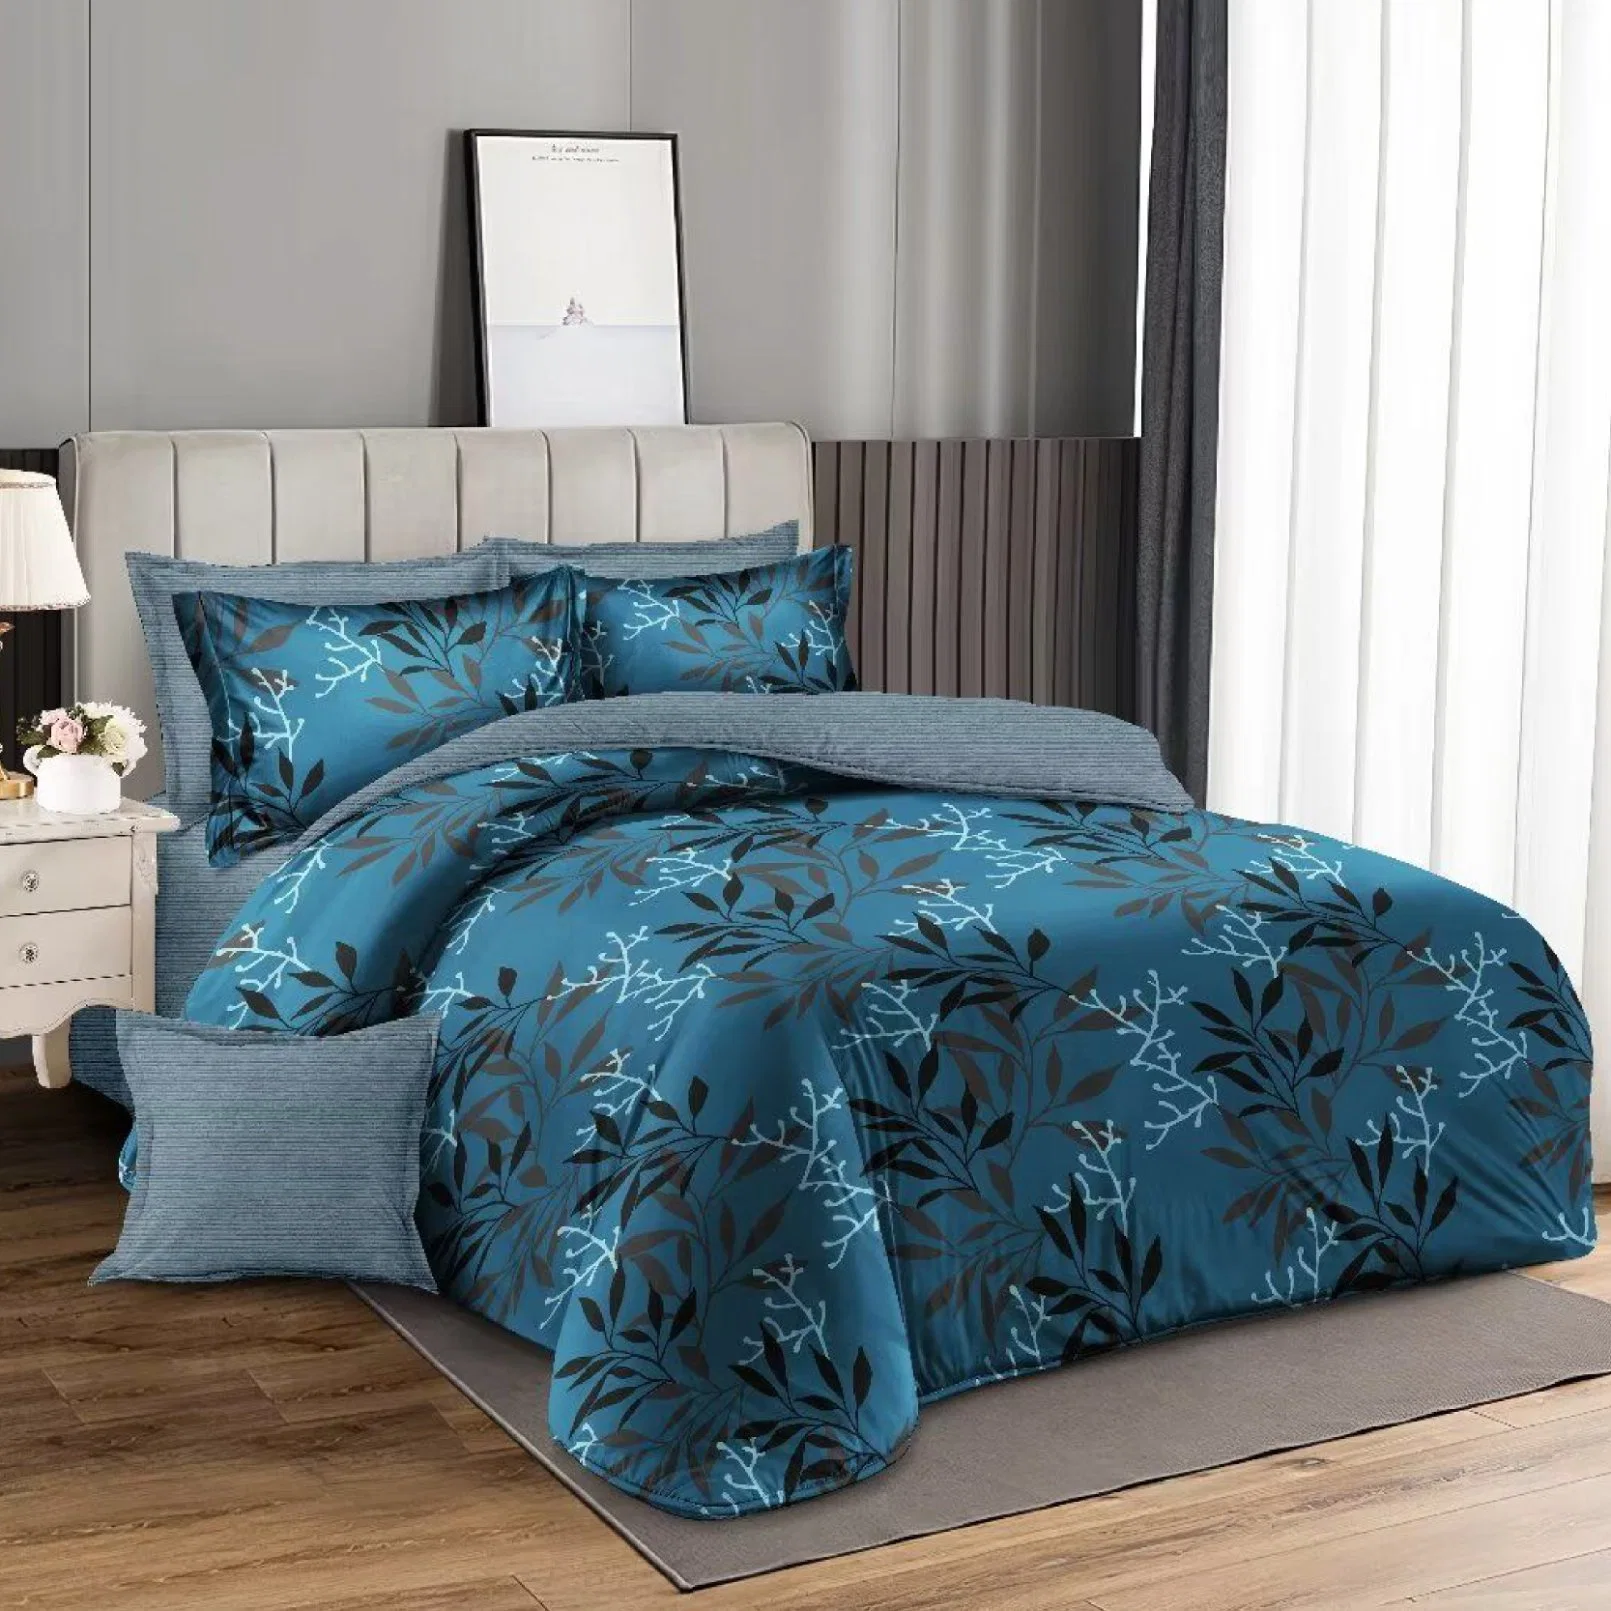 Hotel-Grade Polyester Bedspread Duvet Cover Decor Printed Bedsheets Matching Pillow Shams Quilted Comforter Customized Bed Linen Home Textile Bedding